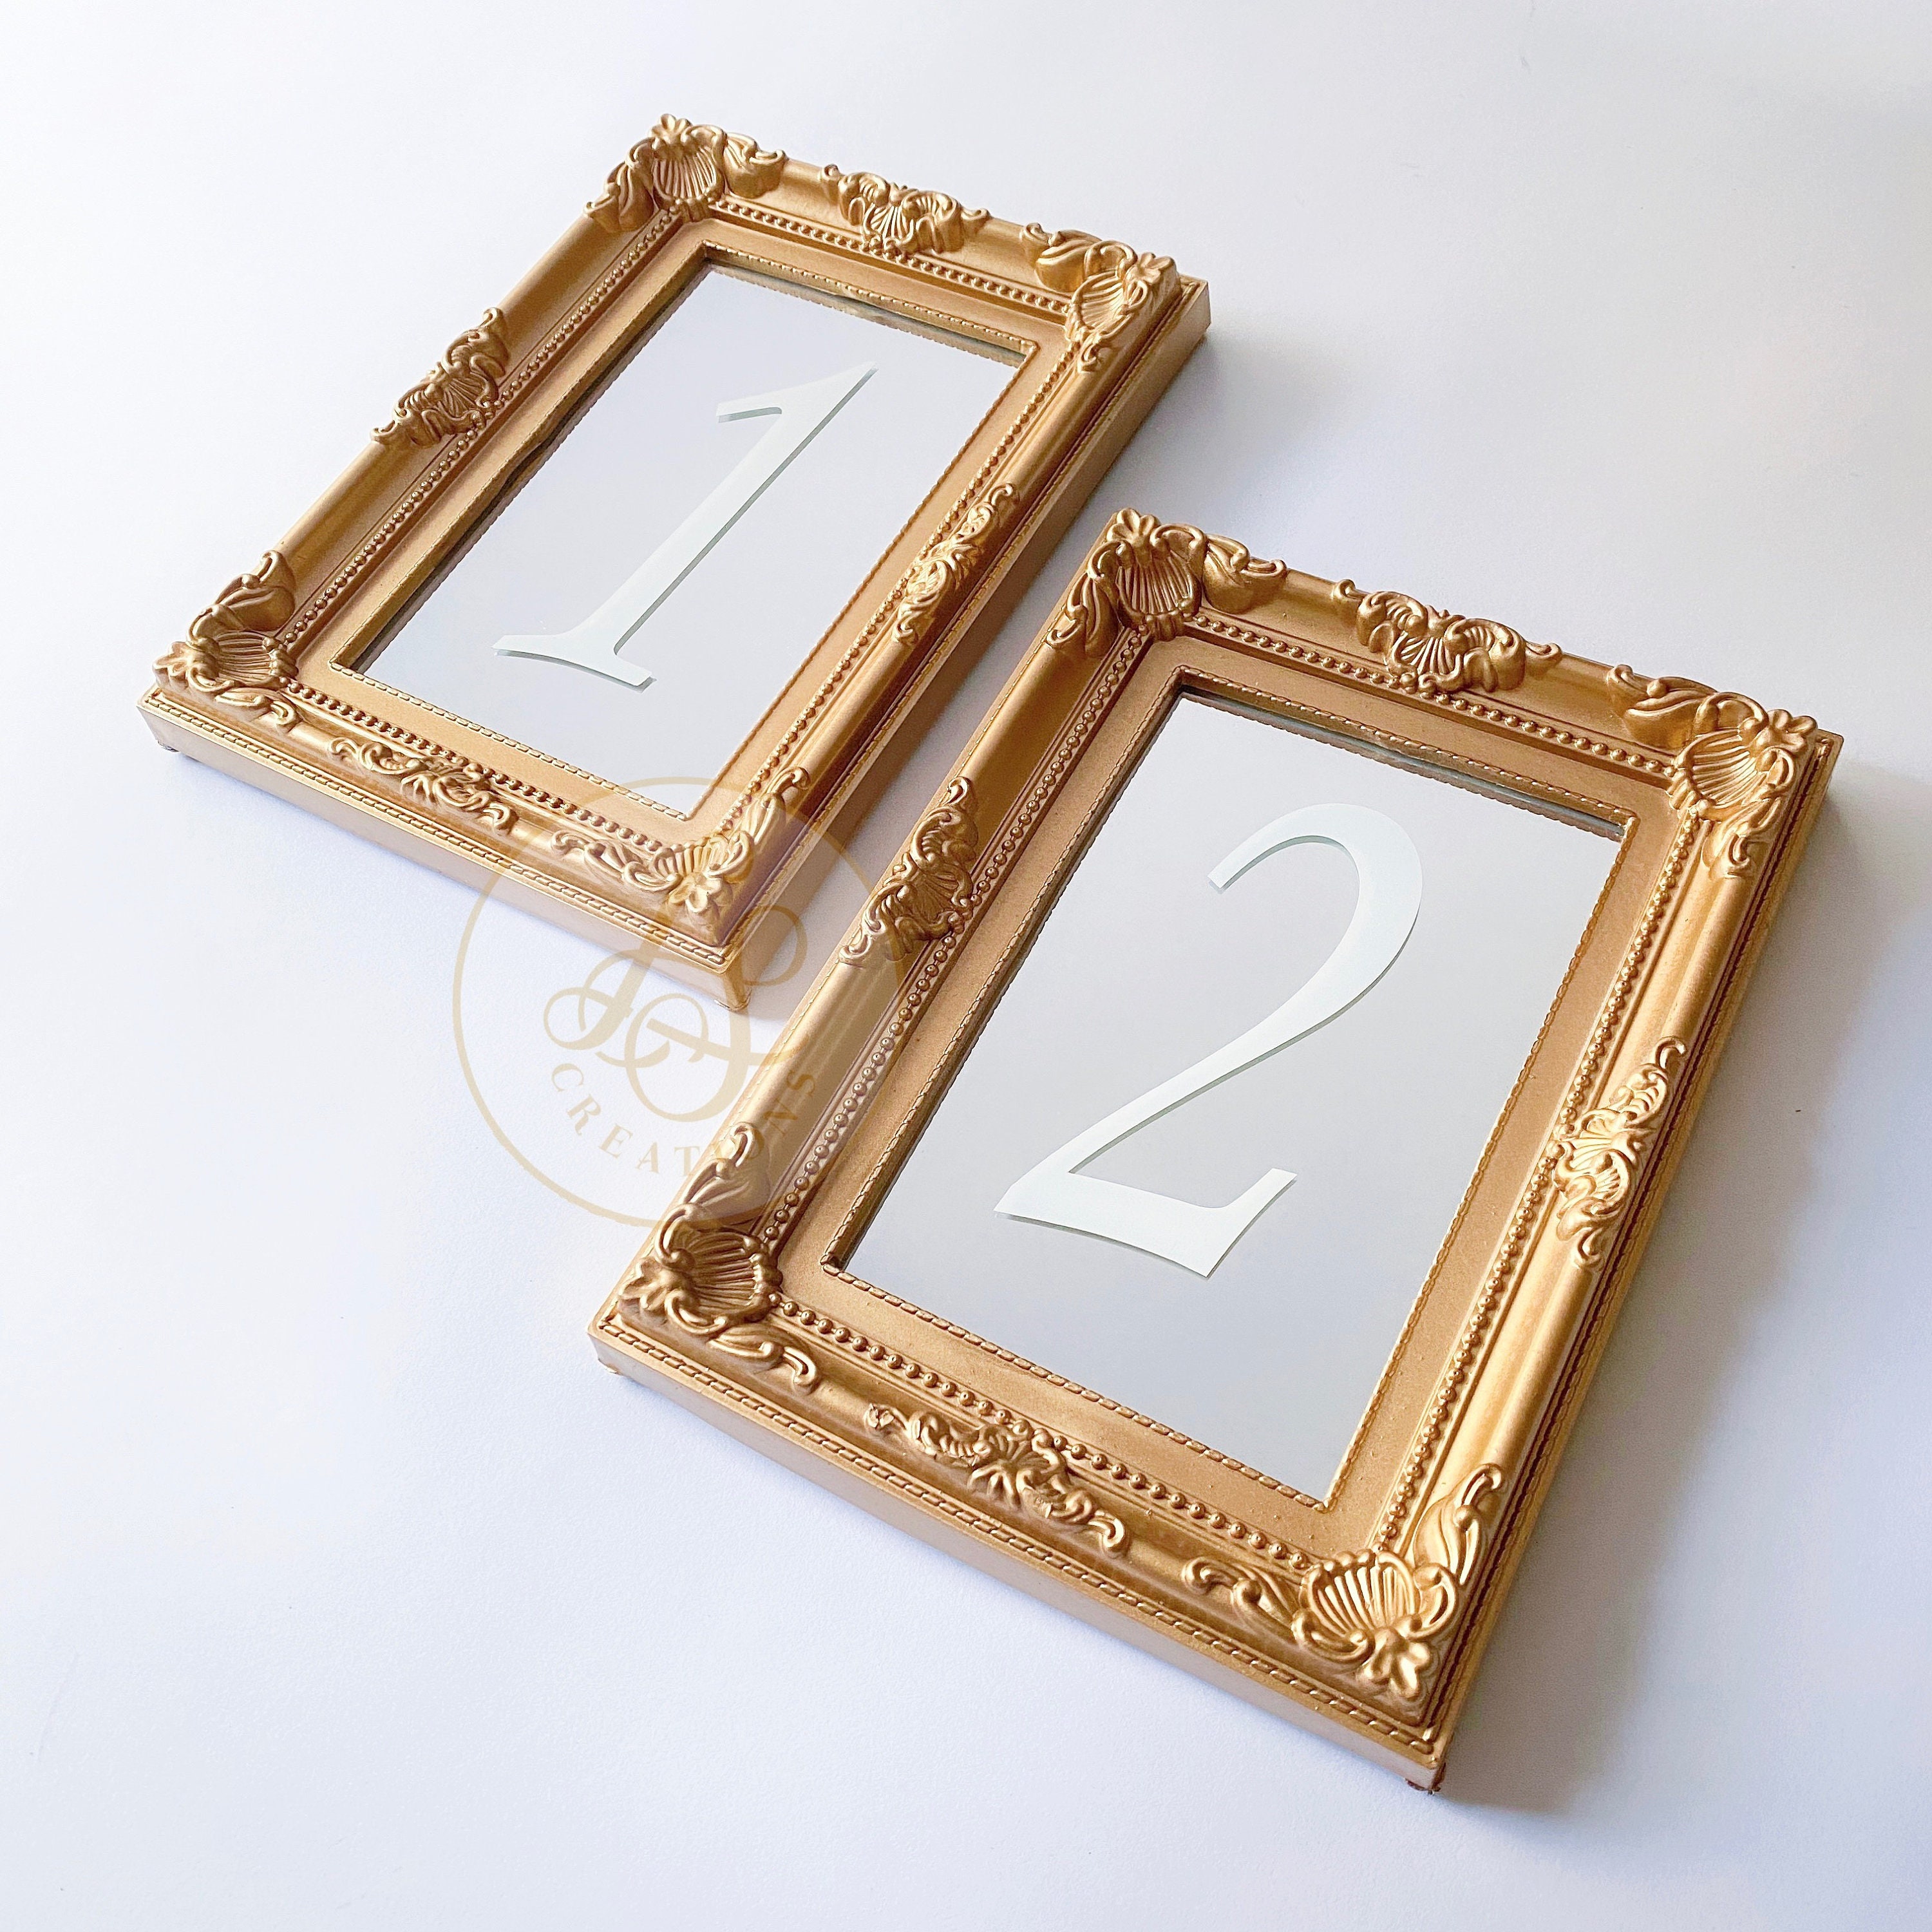 Wedding table number in a gold frame using a gold sharpie on